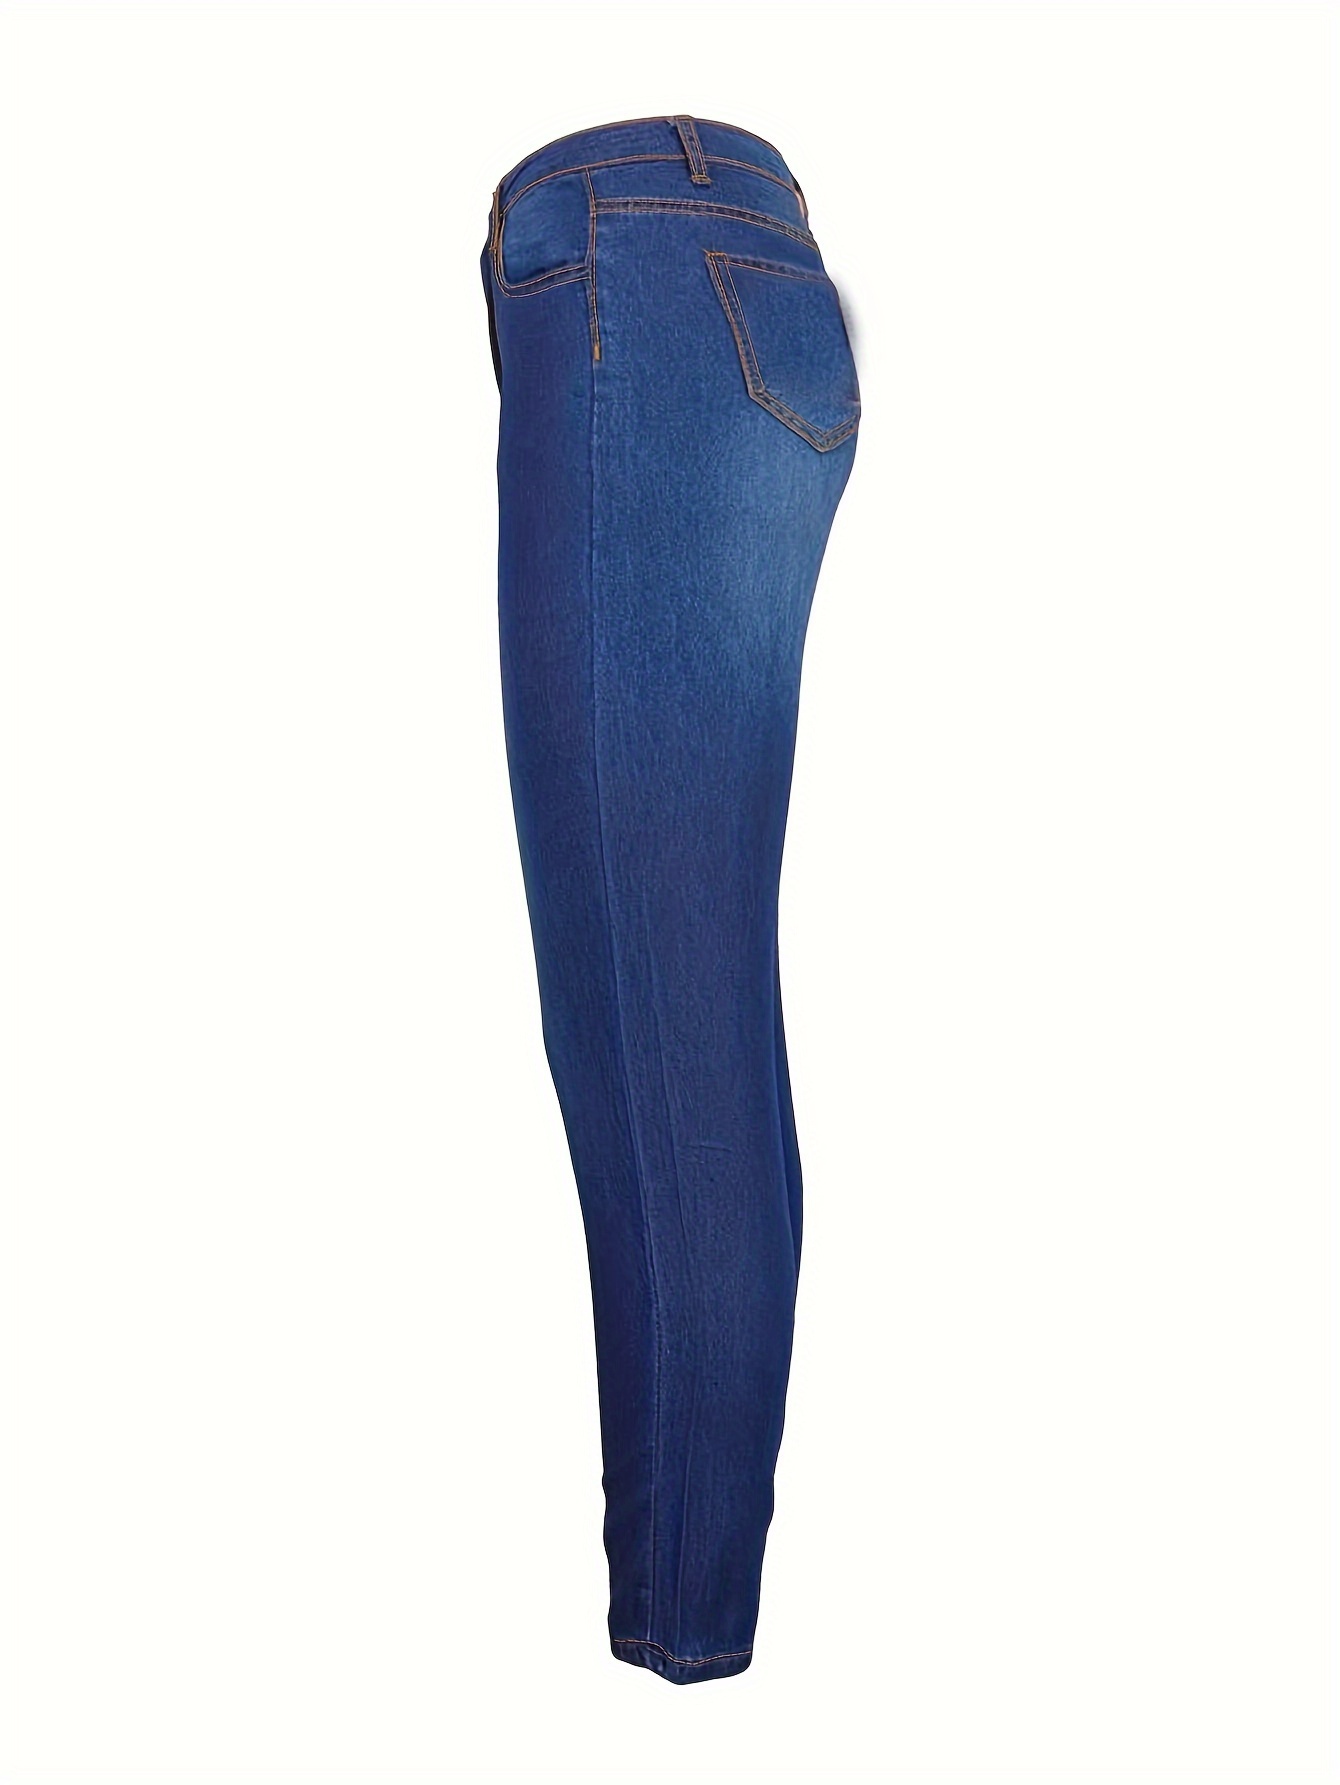 plus size basic jeans womens plus solid button fly high rise medium stretch skinny jeans